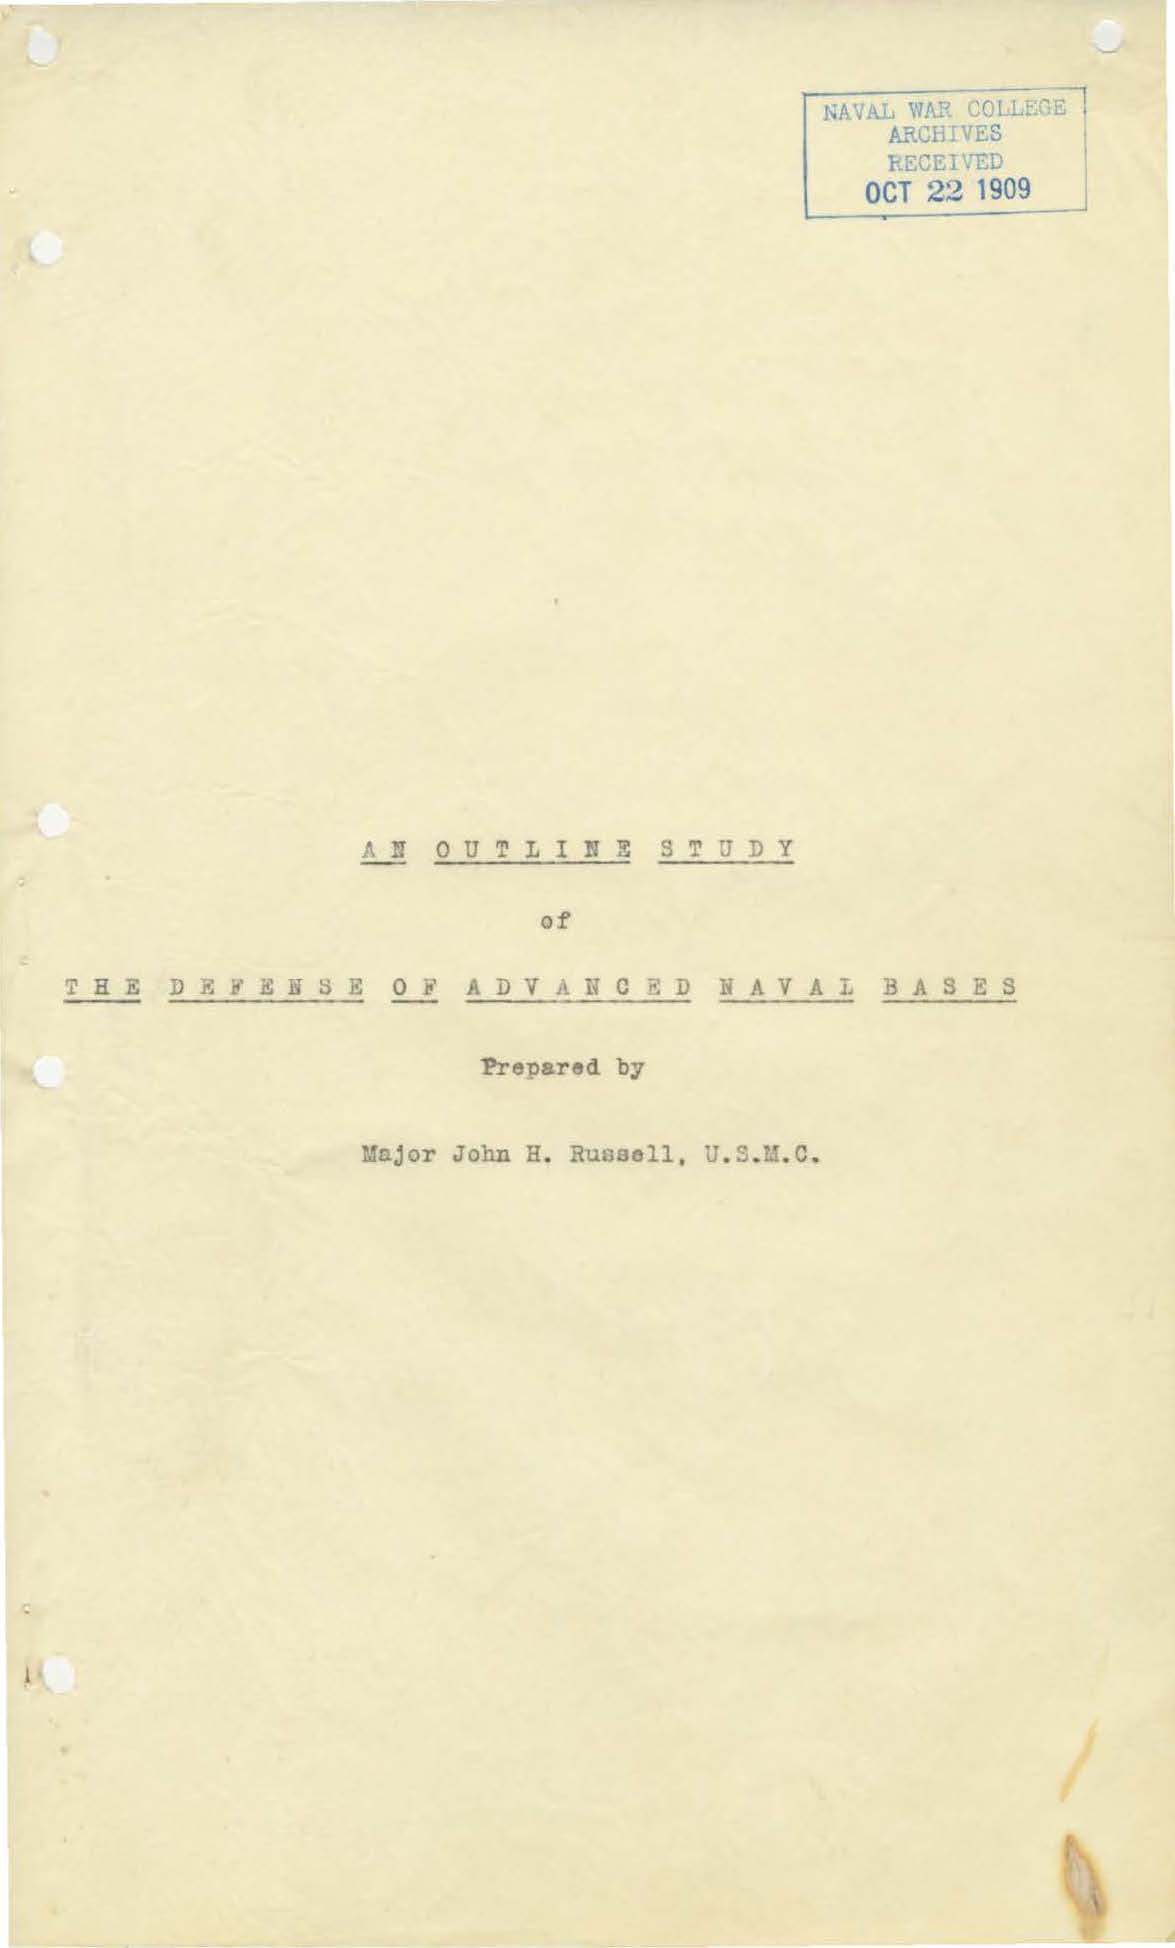 Outline Study of the Defense of Advanced Naval Bases, John H. Russell